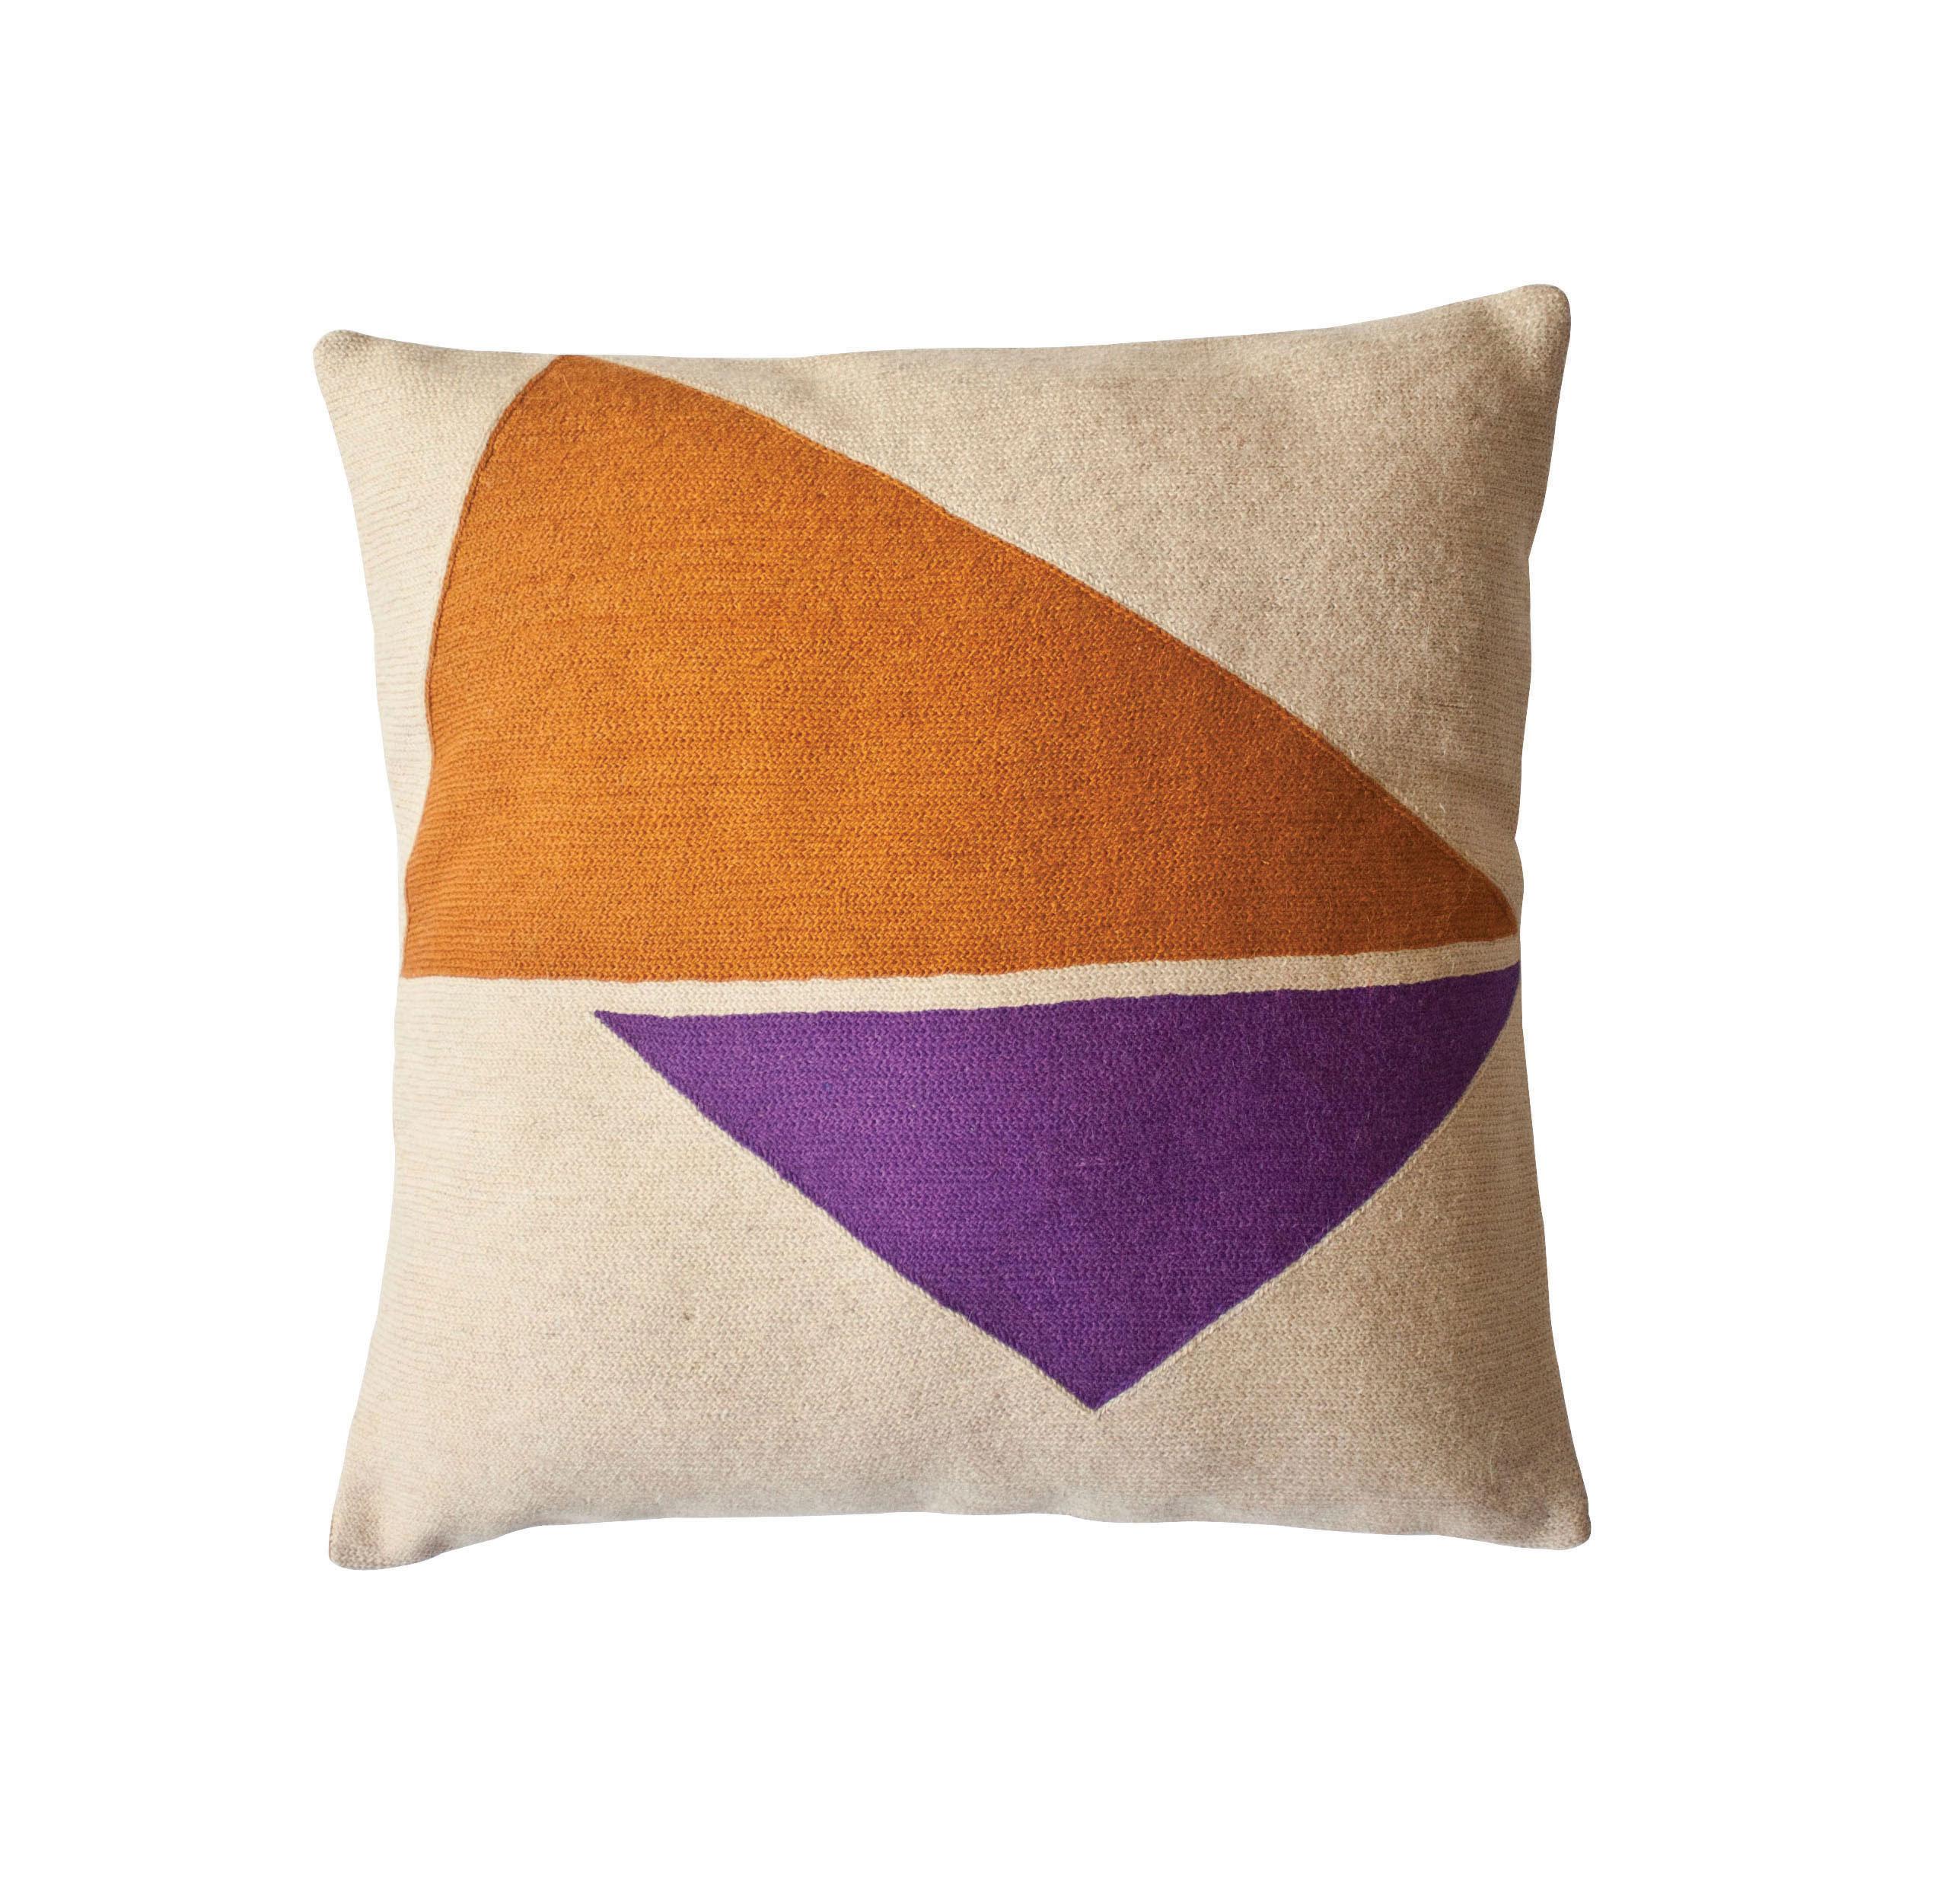 Modern Lucent Reflection Hand Embroidered Geometric Throw Pillow Cover